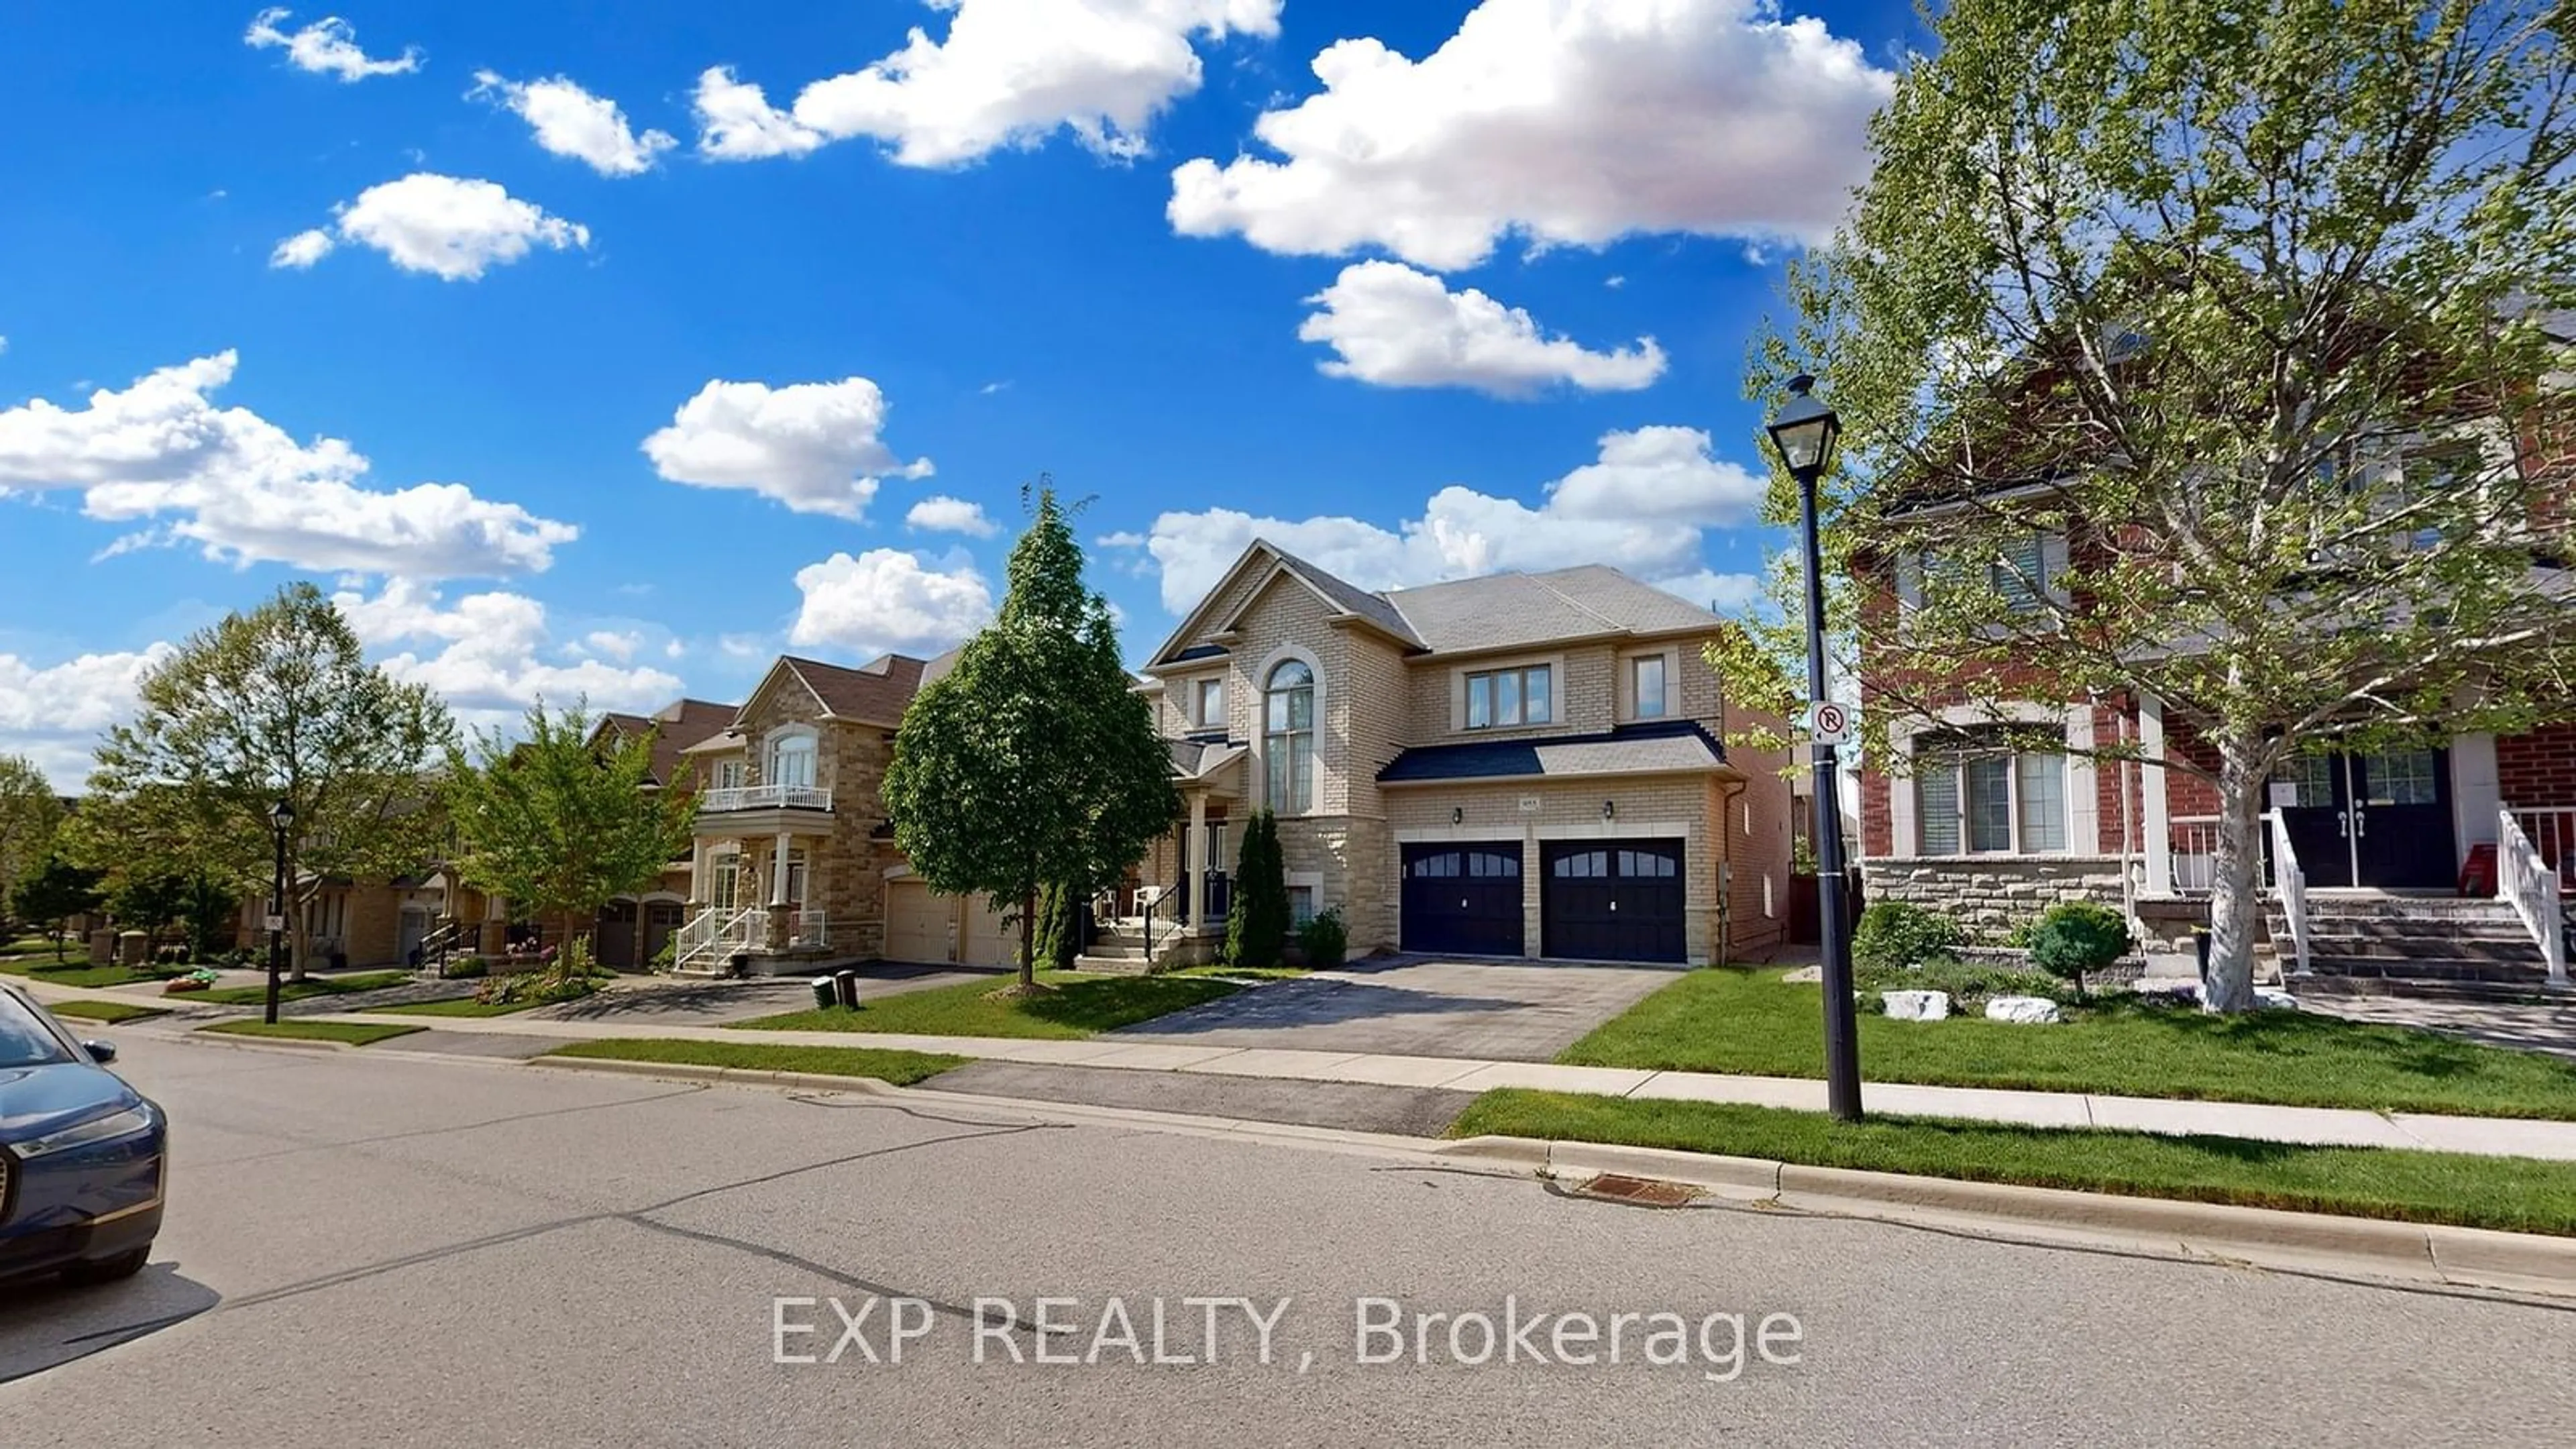 Frontside or backside of a home for 955 Ernest cousins Circ, Newmarket Ontario L3X 0B7